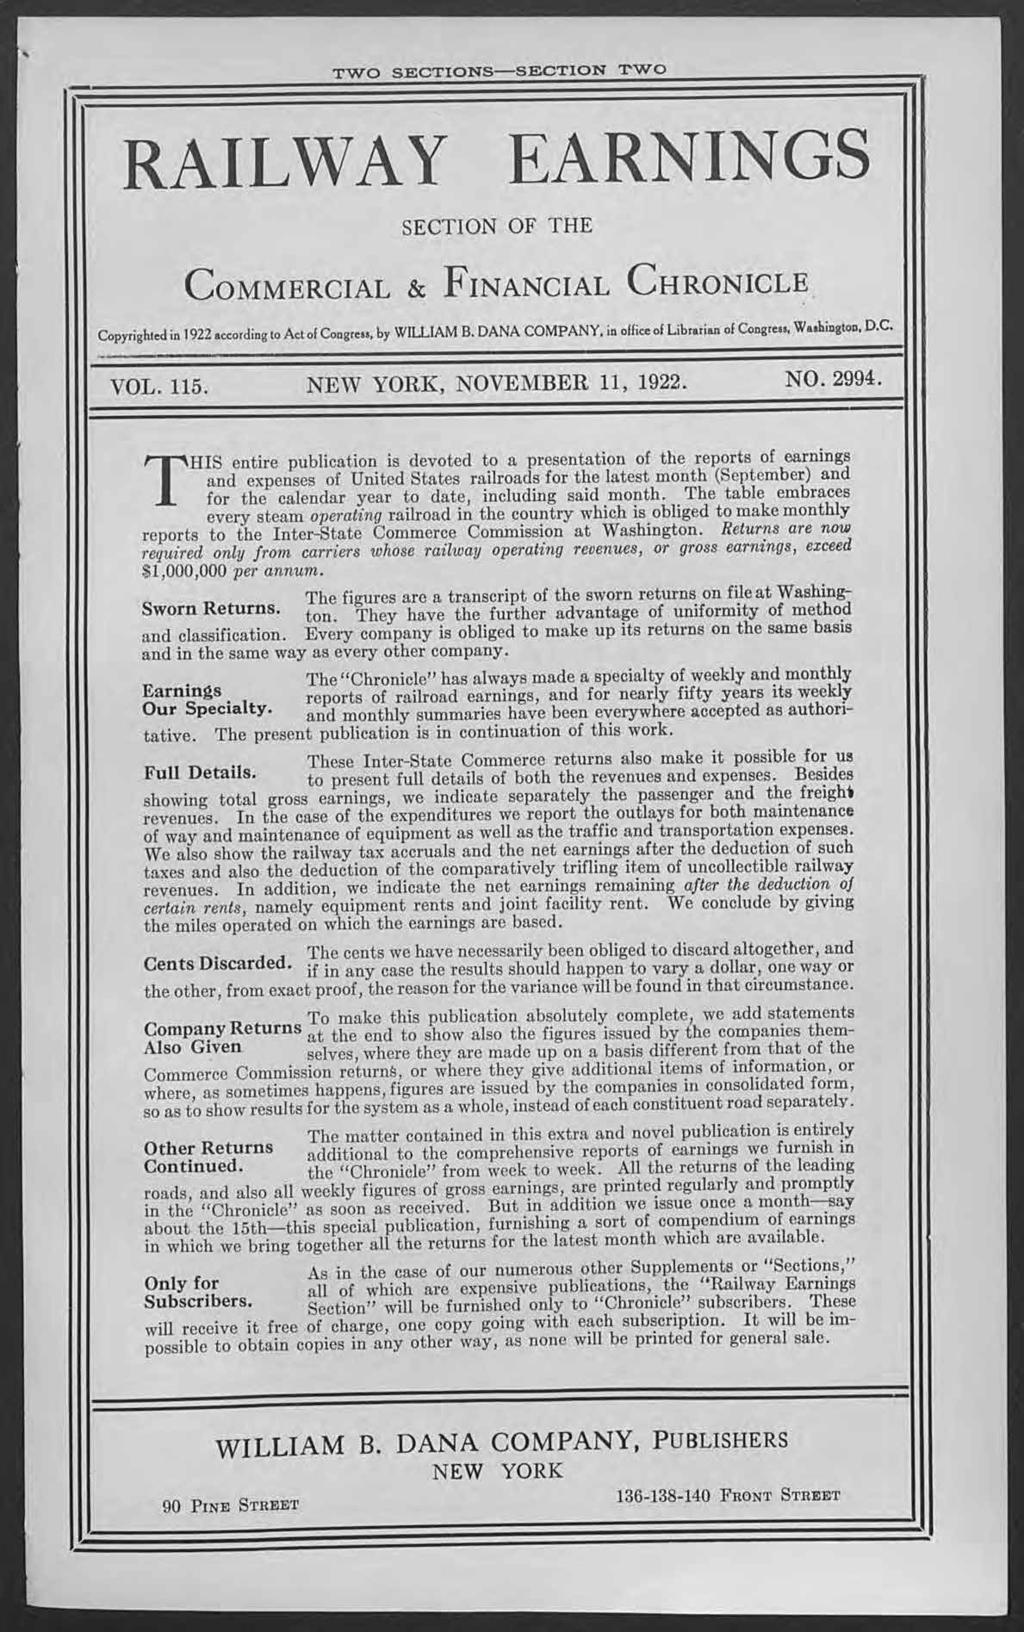 TWO SECTIONS SECTION TWO RAILWAY EARNINGS SECTION OF THE COMMERCIAL & FINANCIAL CHRONICLE Copyrighted in 1922 according to Act of Congress, by WILLIAM B.